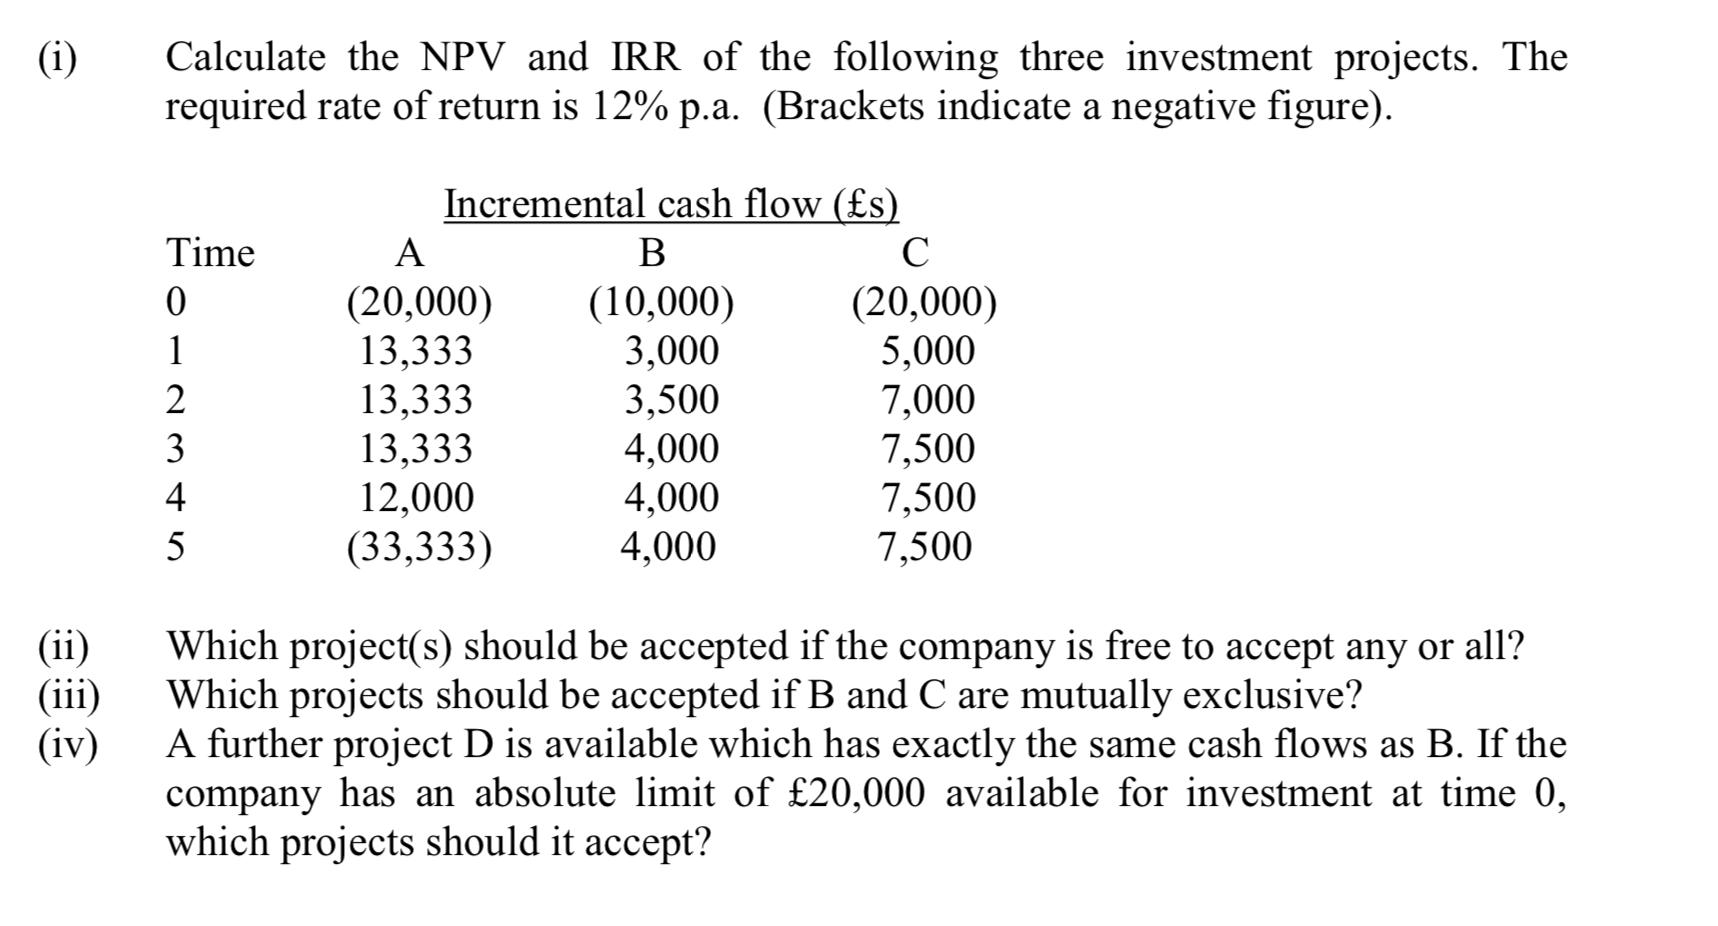 (1) Calculate the NPV and IRR of the following three investment projects. The required rate of return is 12% p.a. (Brackets i